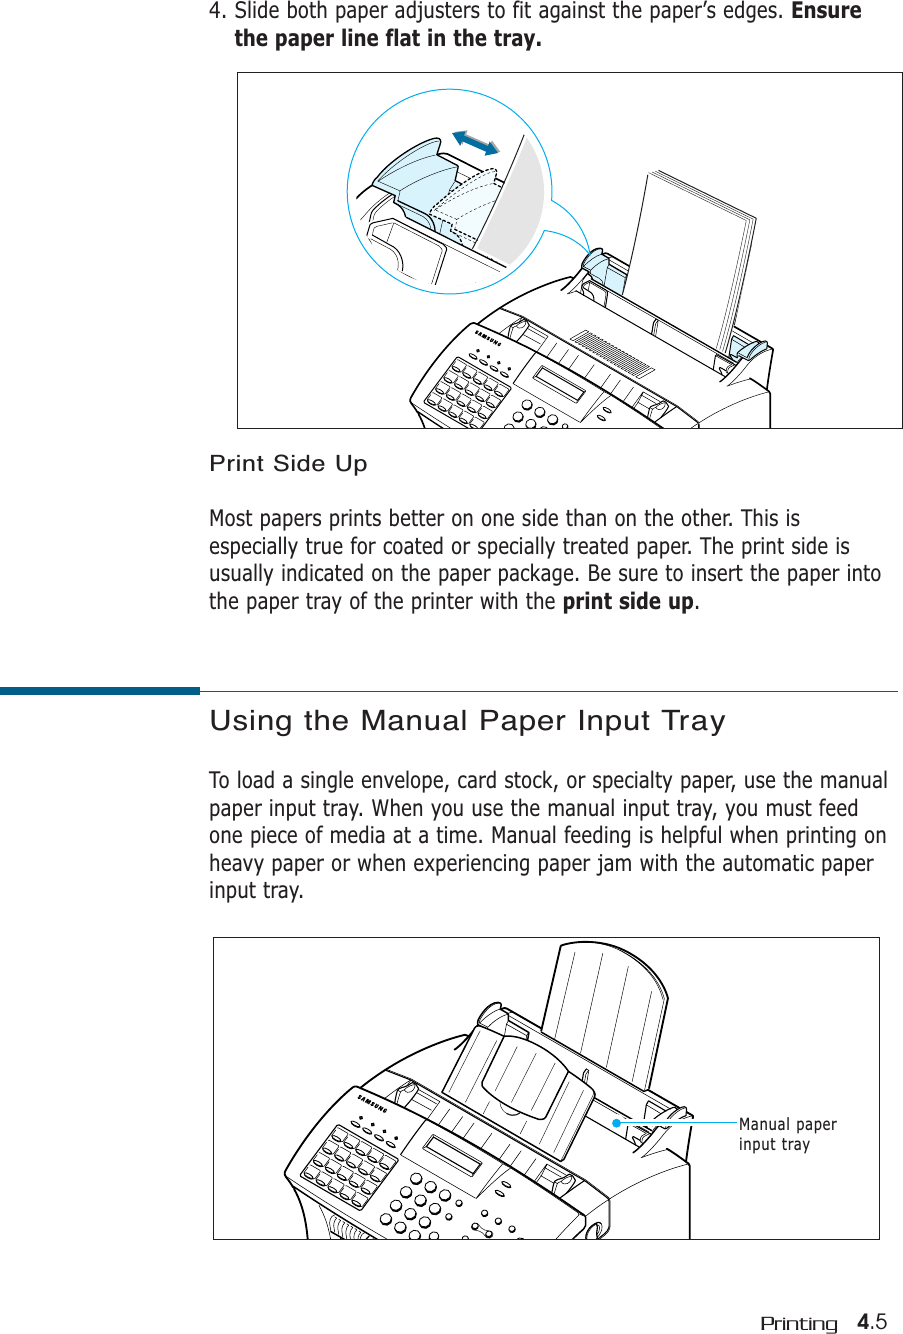 4.5Printing4. Slide both paper adjusters to fit against the paper’s edges. Ensurethe paper line flat in the tray. Print Side UpMost papers prints better on one side than on the other. This isespecially true for coated or specially treated paper. The print side isusually indicated on the paper package. Be sure to insert the paper intothe paper tray of the printer with the print side up.Using the Manual Paper Input TrayTo load a single envelope, card stock, or specialty paper, use the manualpaper input tray. When you use the manual input tray, you must feedone piece of media at a time. Manual feeding is helpful when printing onheavy paper or when experiencing paper jam with the automatic paperinput tray.Manual paperinput tray